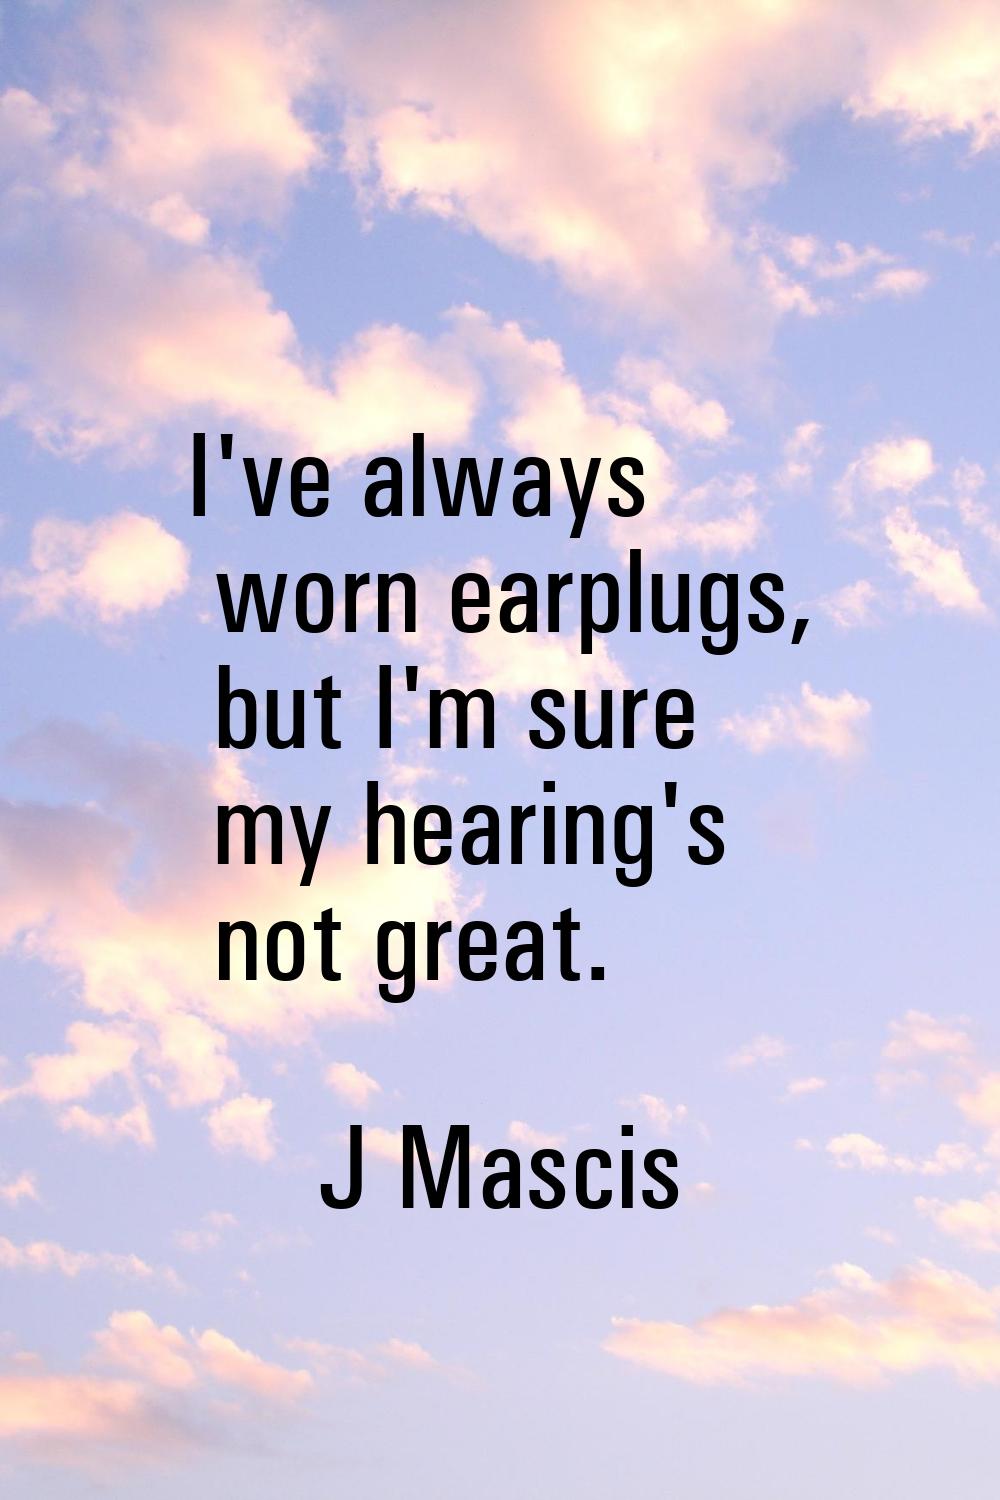 I've always worn earplugs, but I'm sure my hearing's not great.